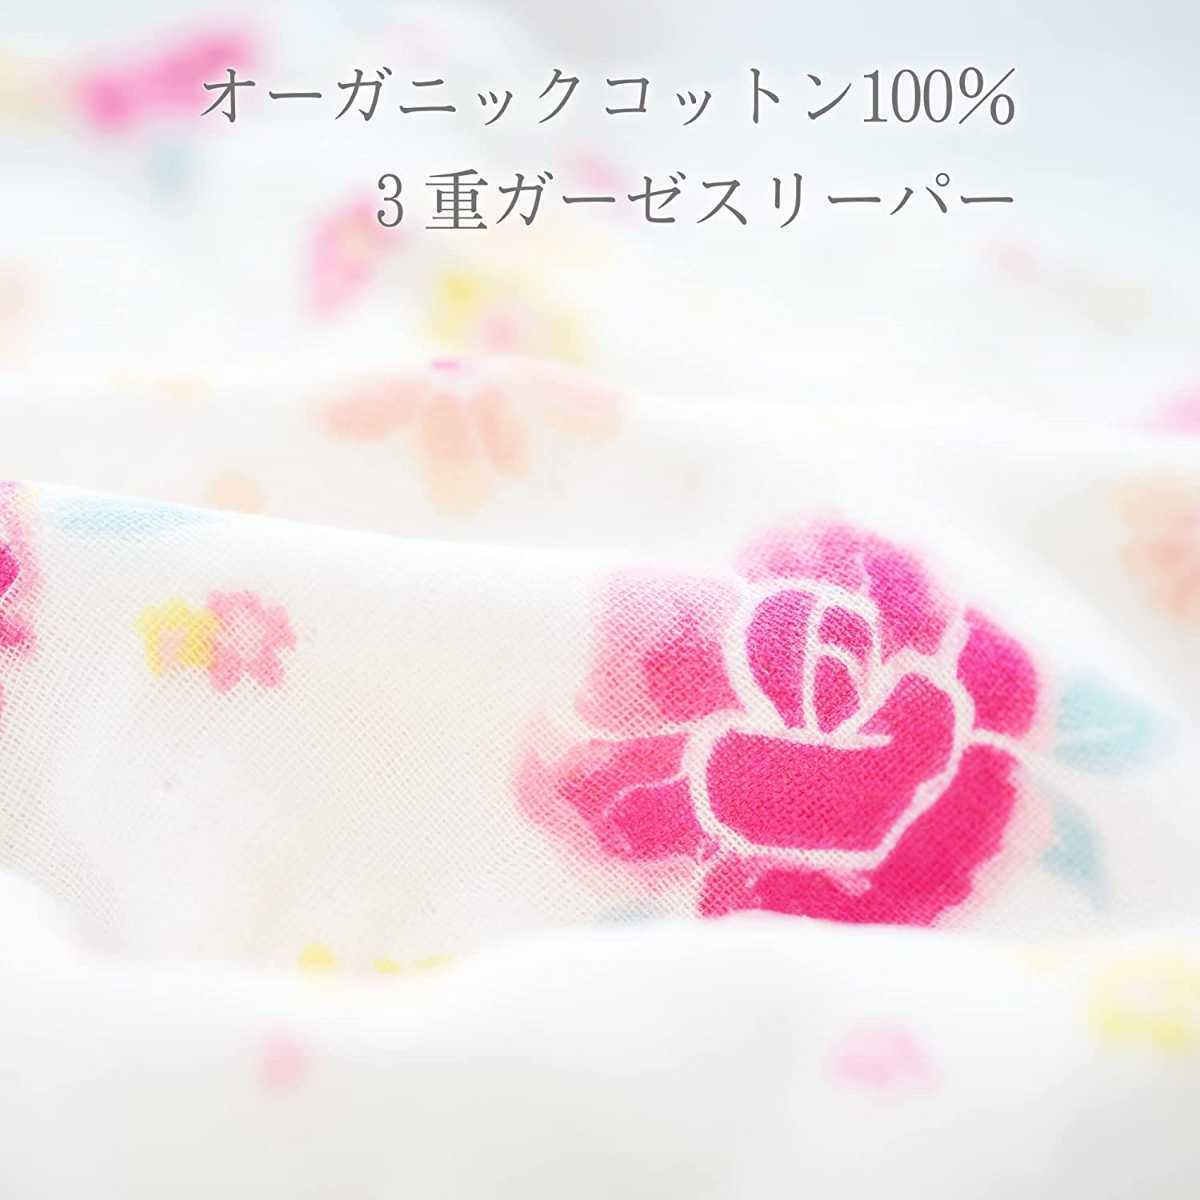  new goods * regular price 4,500 jpy sopnia(sopnia) for summer baby sleeper organic cotton 100% baby made in Japan 3 -ply gauze girl celebration of a birth gift 